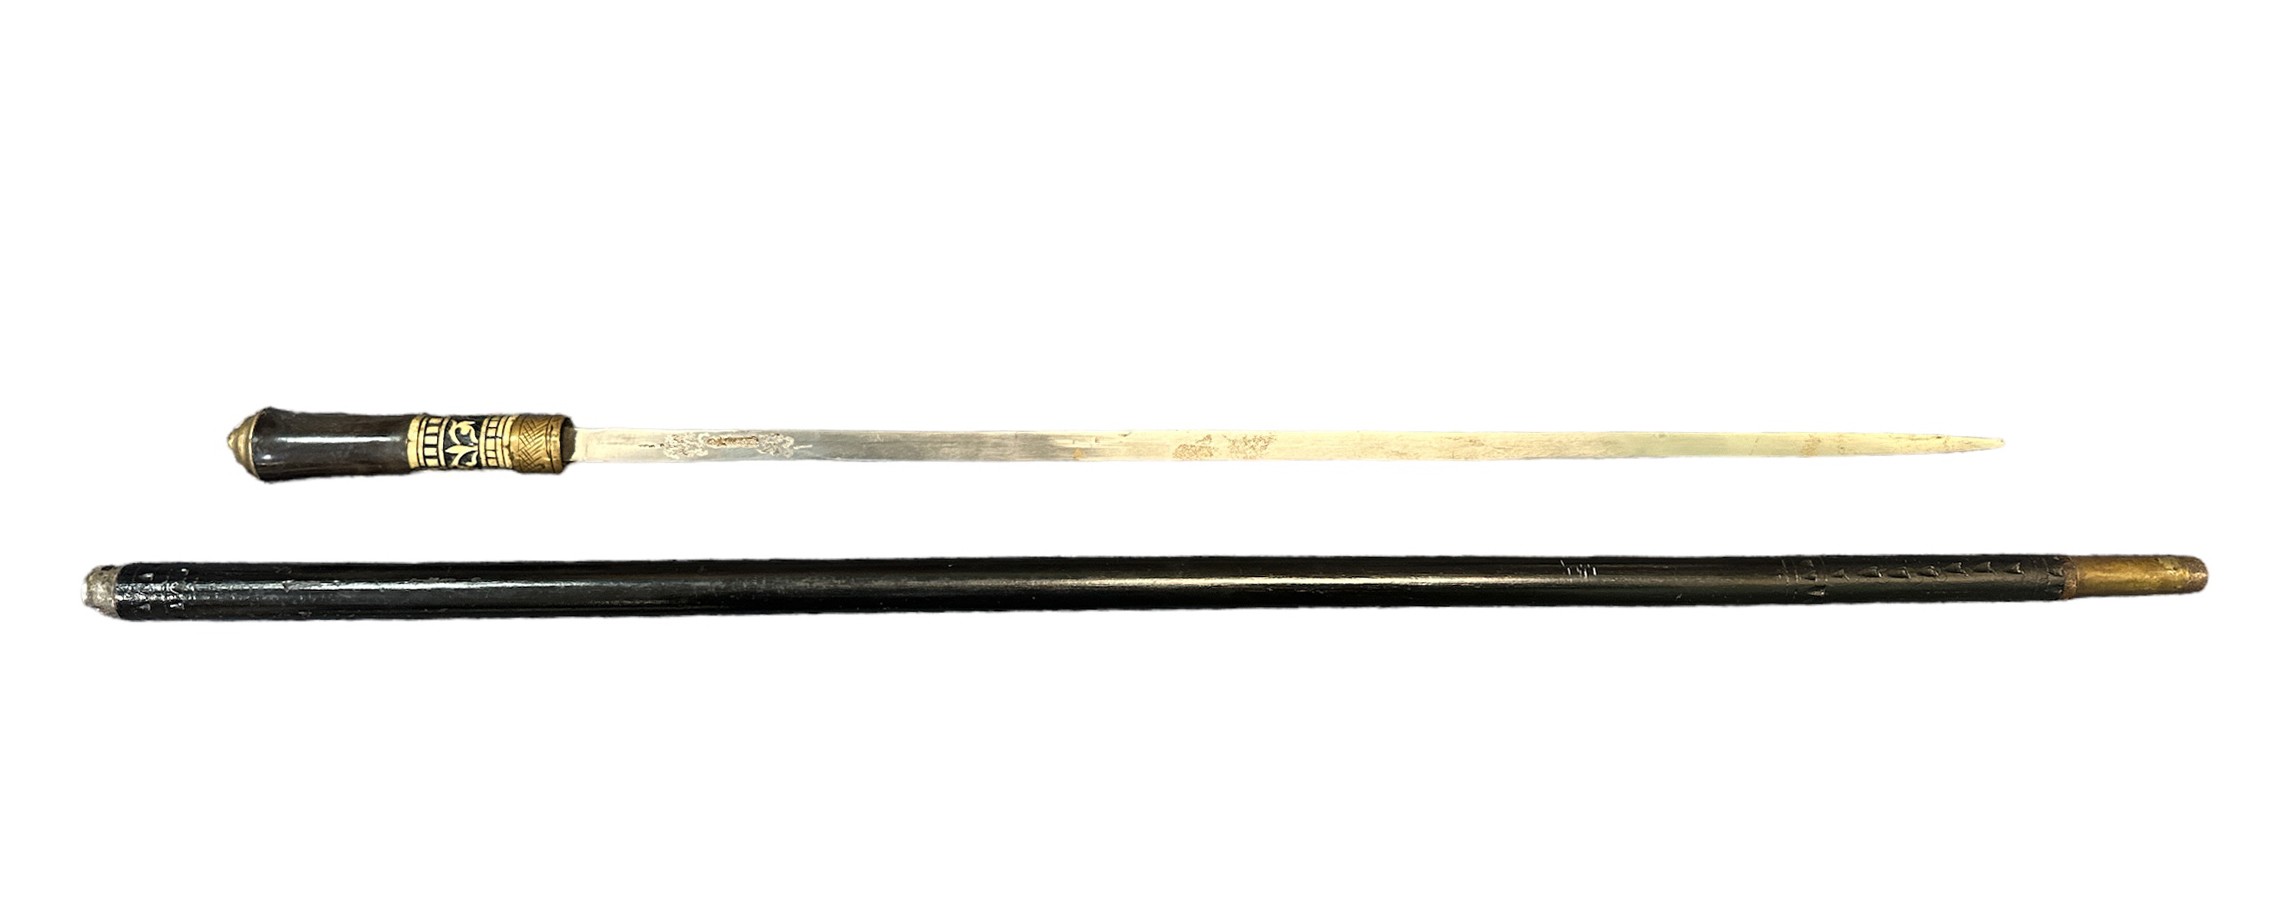 Late 19th/early 20th Century Indian sword stick - Image 3 of 3